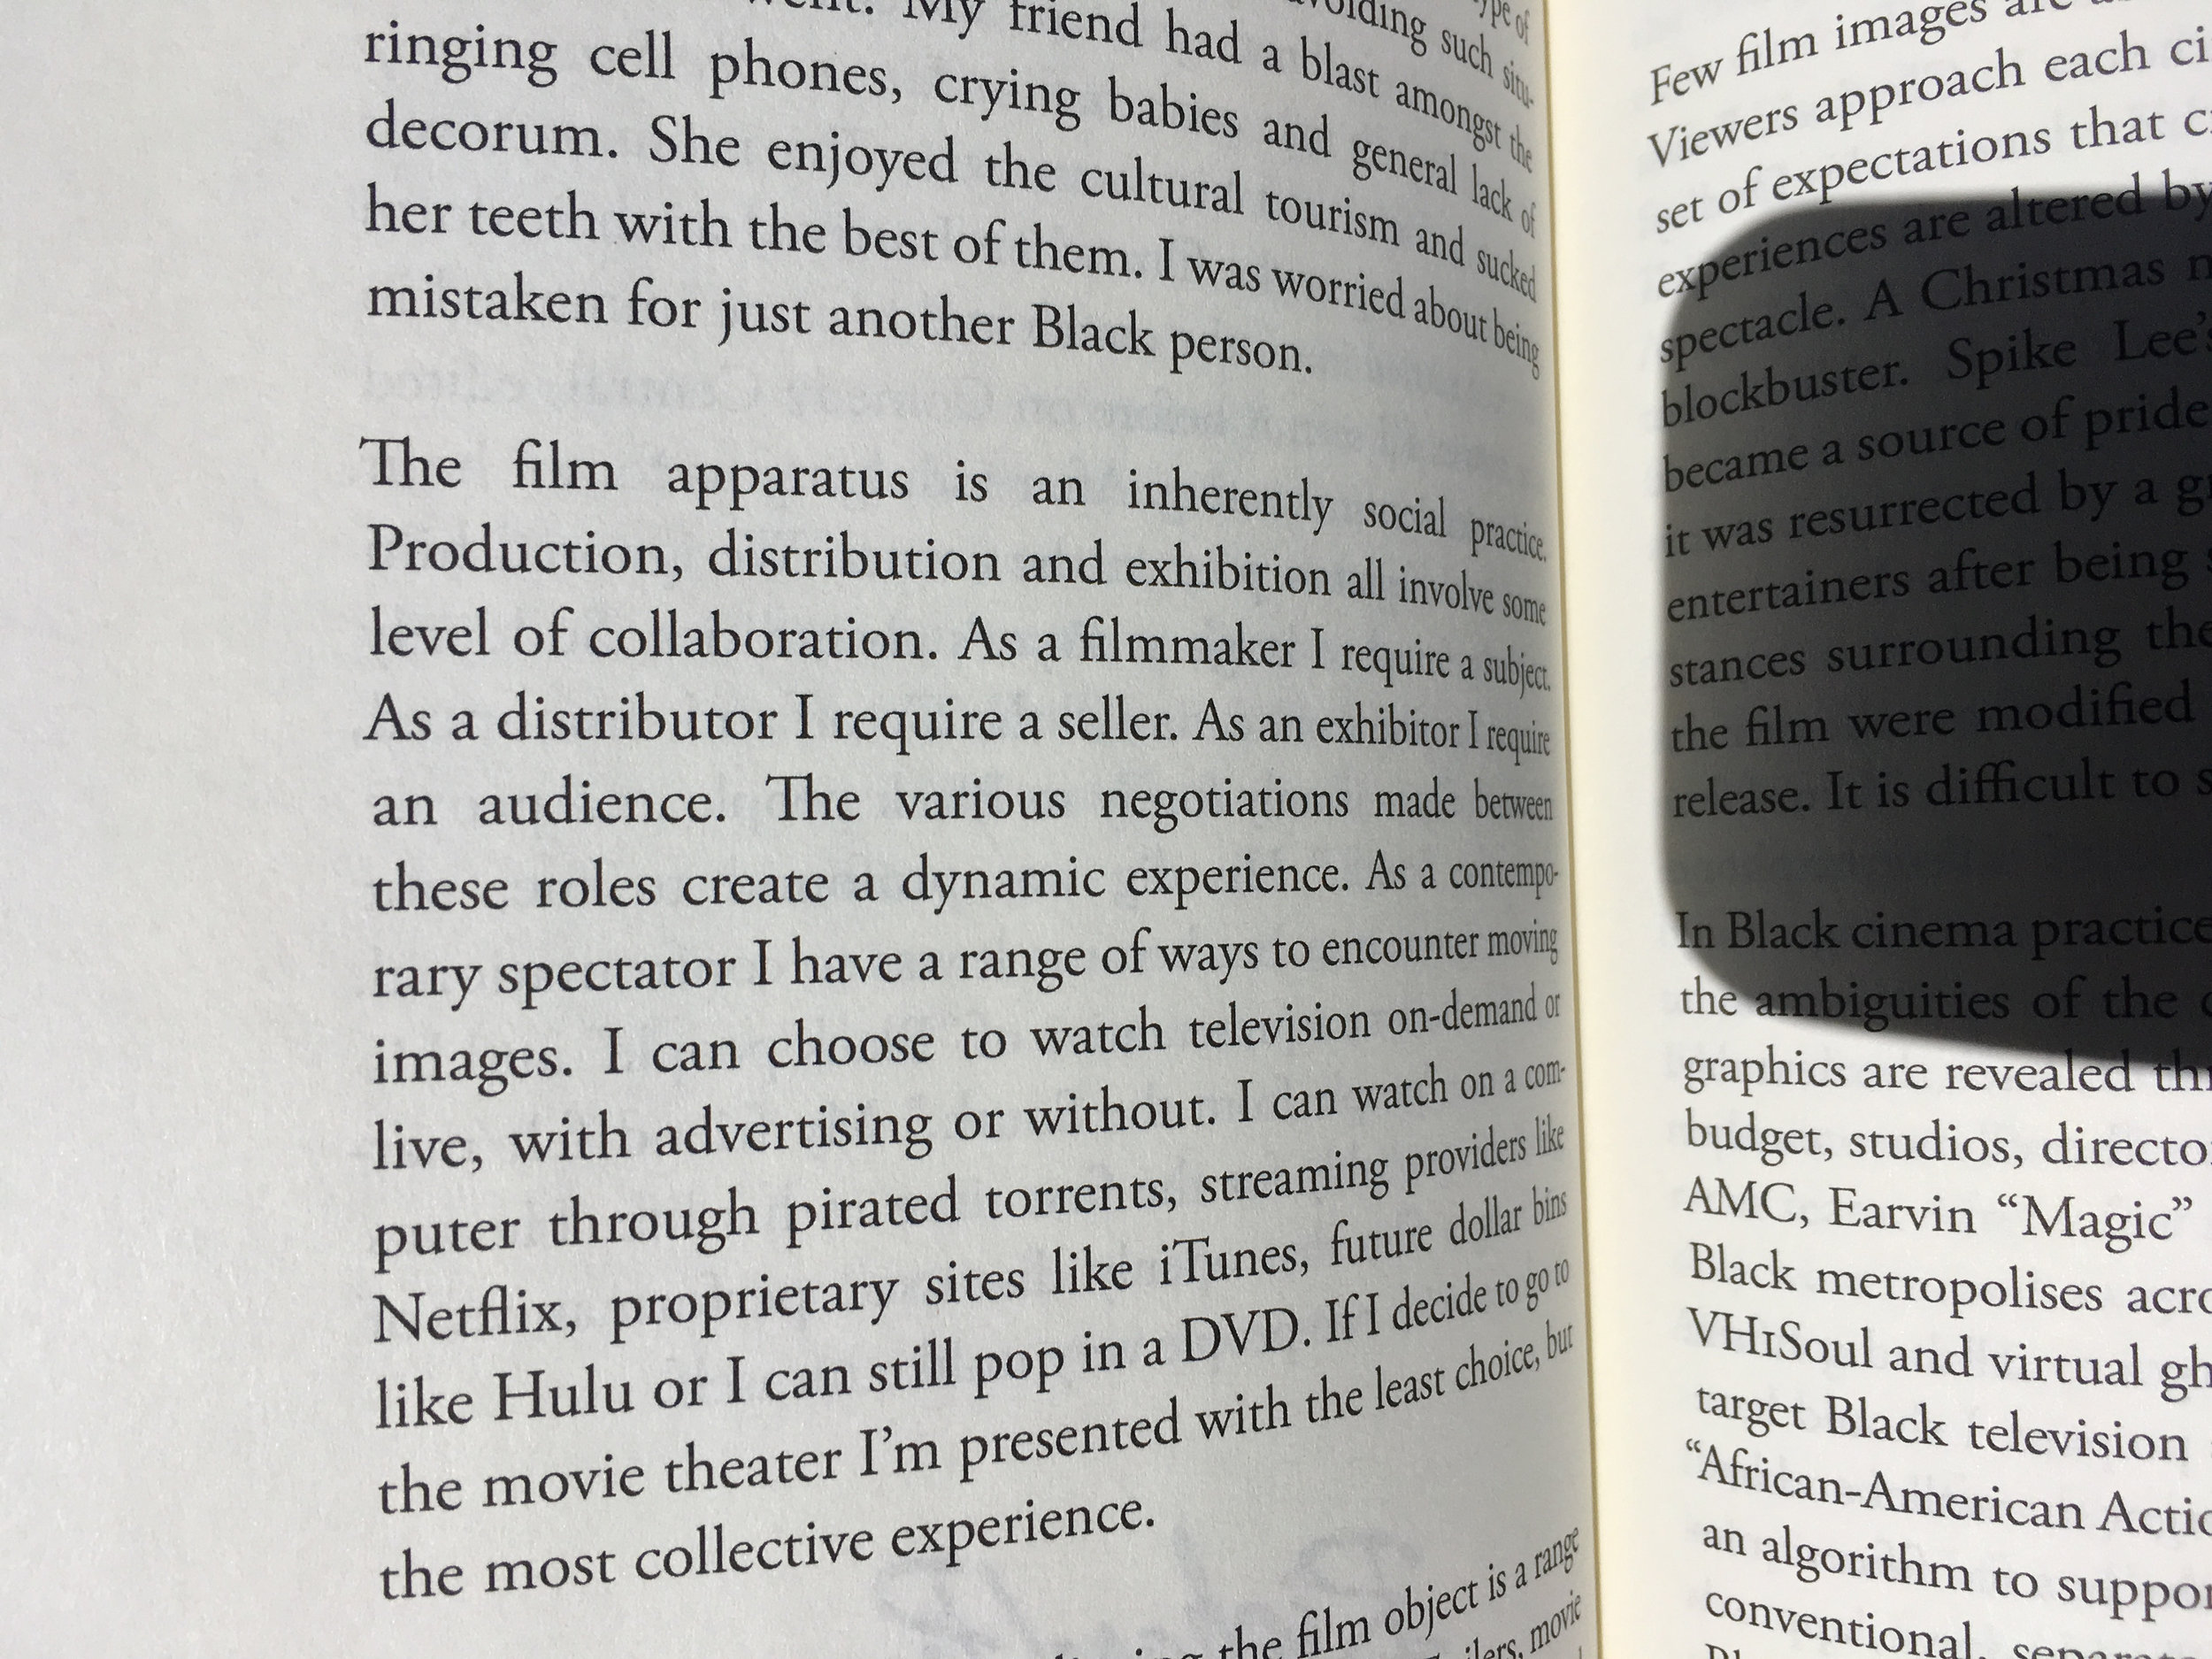  Detail: Martine Syms,  Implications and Distinctions: Format, Content and Context in Contemporary Race Film  (Houston: Future Plan and Program, 2011). 